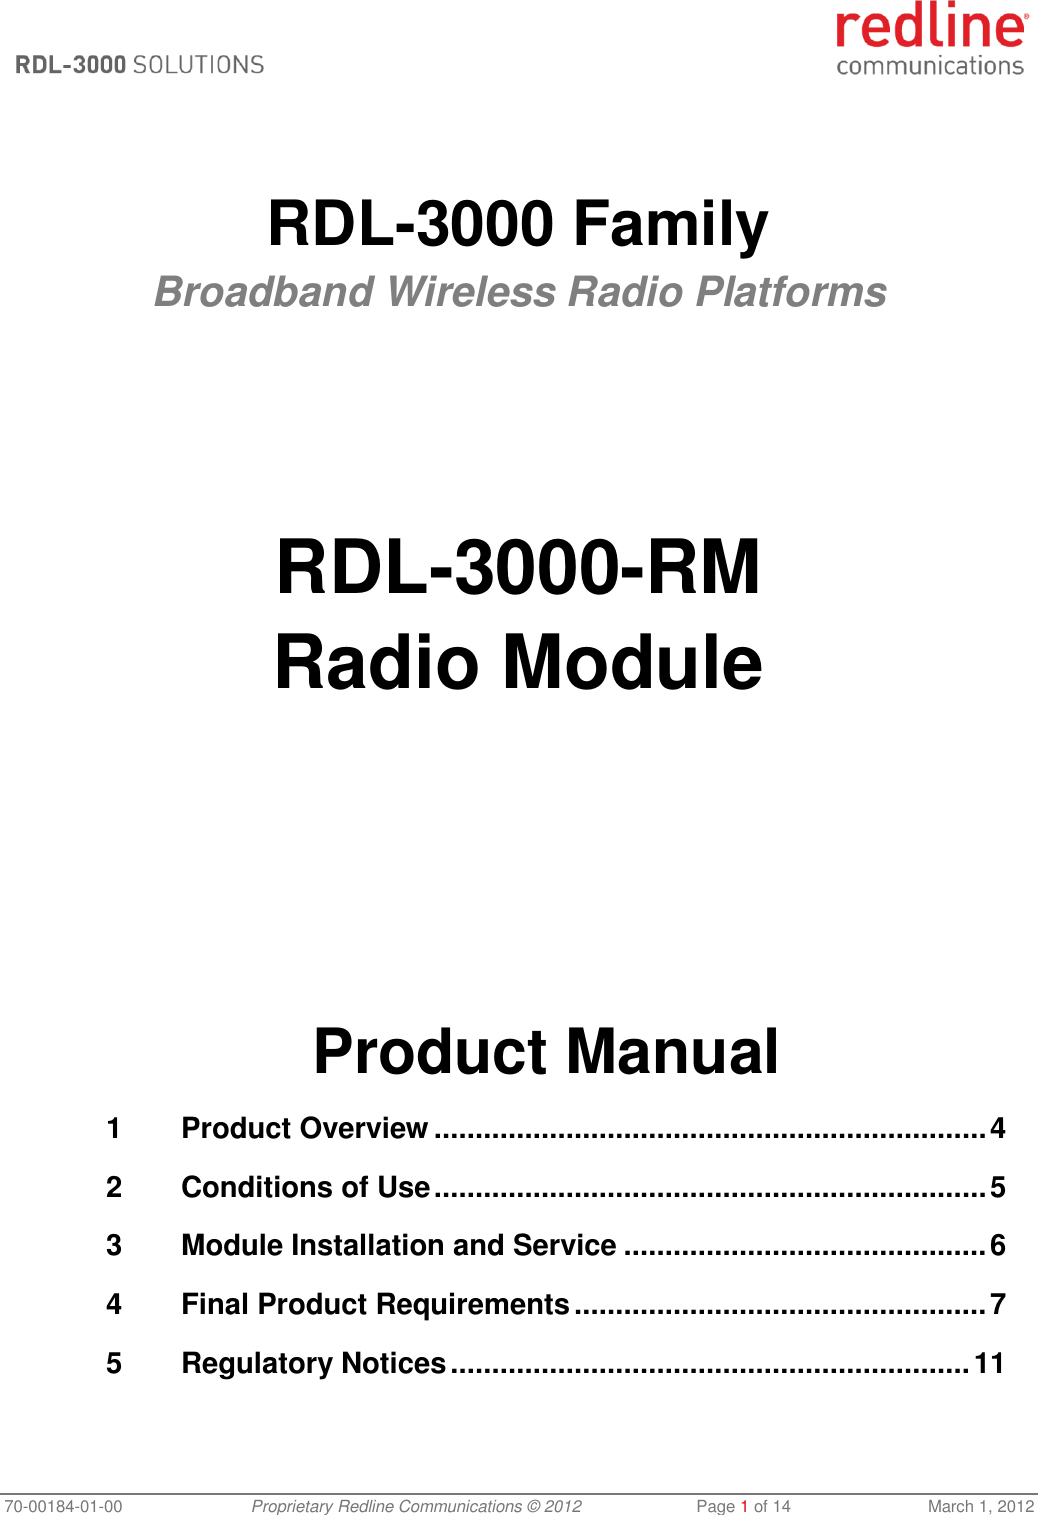  70-00184-01-00 Proprietary Redline Communications © 2012  Page 1 of 14  March 1, 2012    RDL-3000 Family Broadband Wireless Radio Platforms        RDL-3000-RM Radio Module            Product Manual 1 Product Overview ................................................................... 4 2 Conditions of Use ................................................................... 5 3 Module Installation and Service ............................................ 6 4 Final Product Requirements .................................................. 7 5 Regulatory Notices ............................................................... 11 